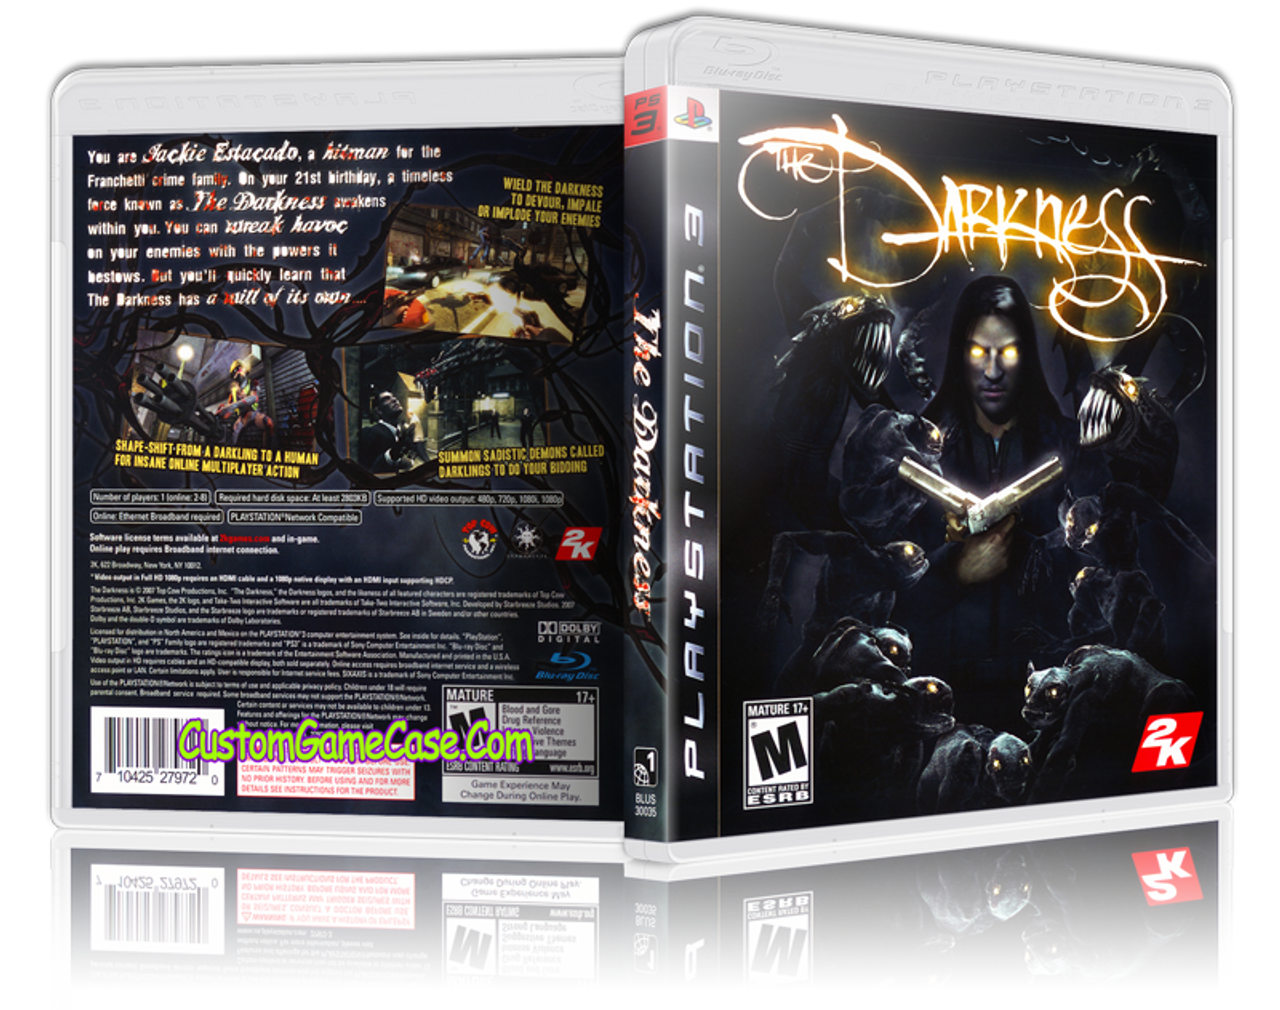 The Darkness - Playstation 3